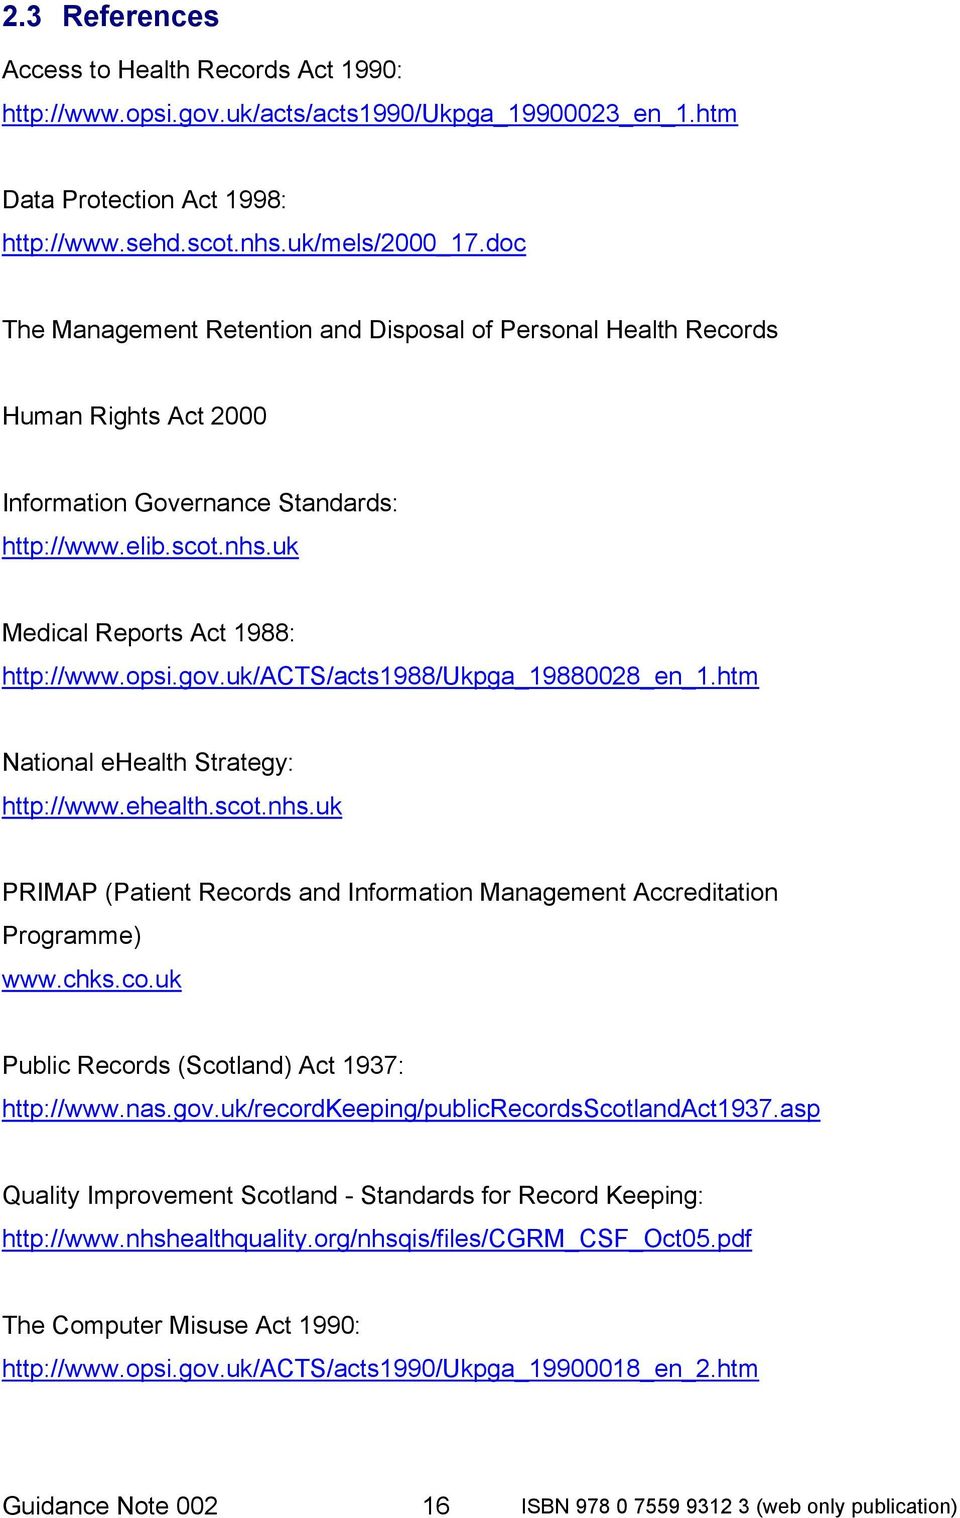 uk/acts/acts1988/ukpga_19880028_en_1.htm National ehealth Strategy: http://www.ehealth.scot.nhs.uk PRIMAP (Patient Records and Information Management Accreditation Programme) www.chks.co.uk Public Records (Scotland) Act 1937: http://www.